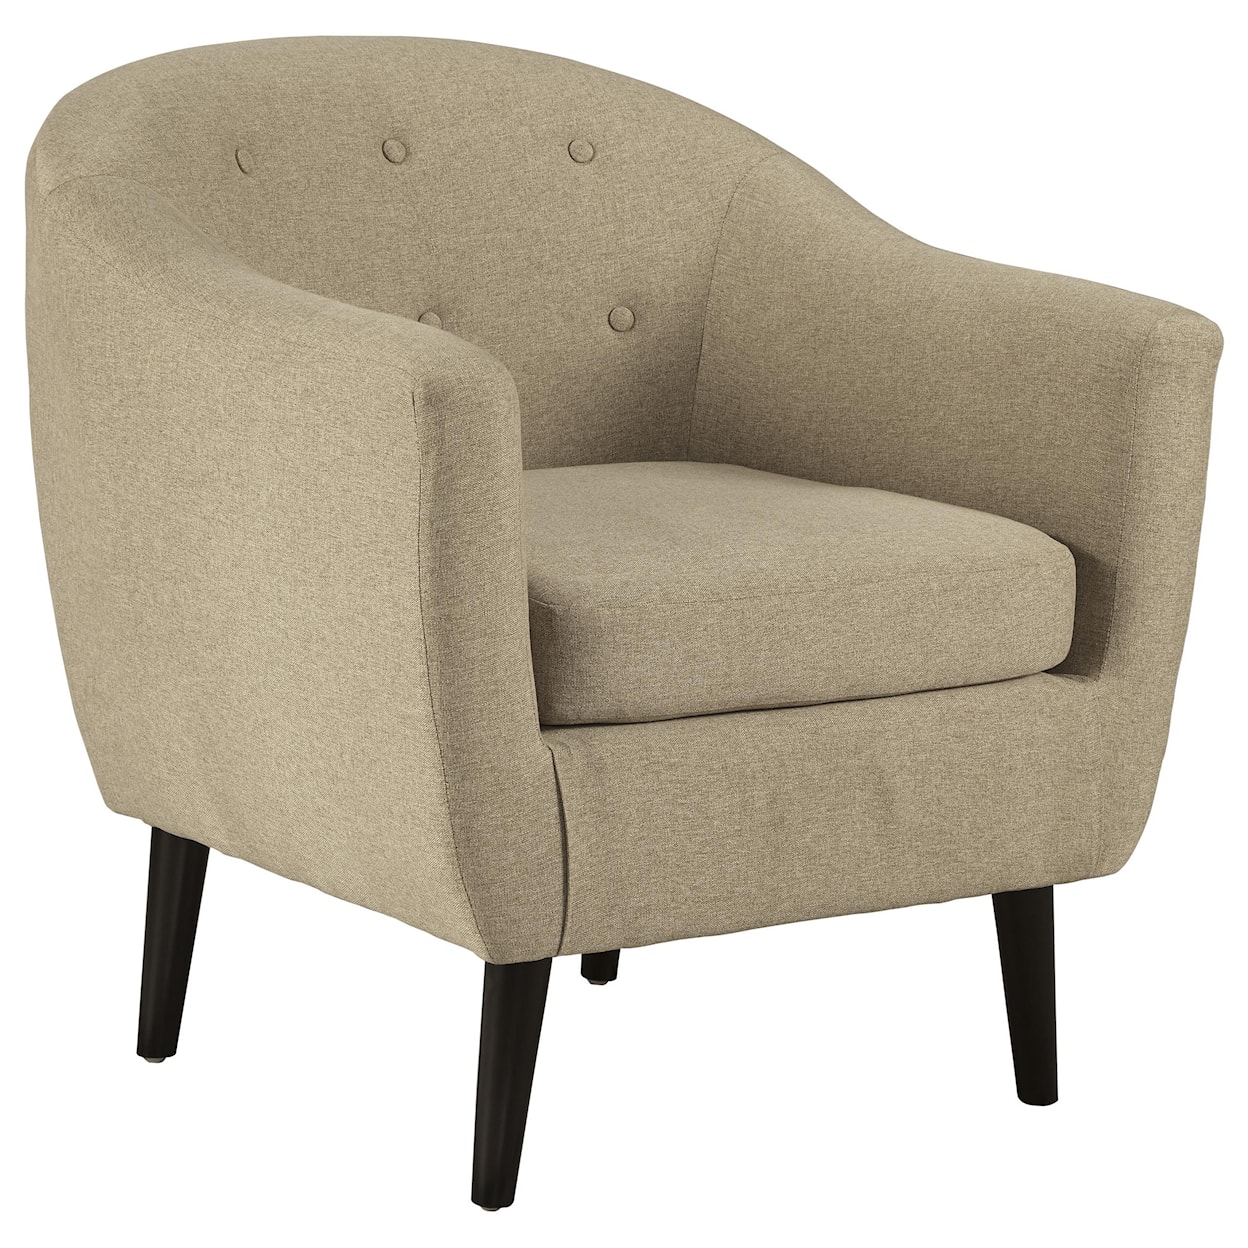 Signature Design by Ashley Klorey Accent Chair